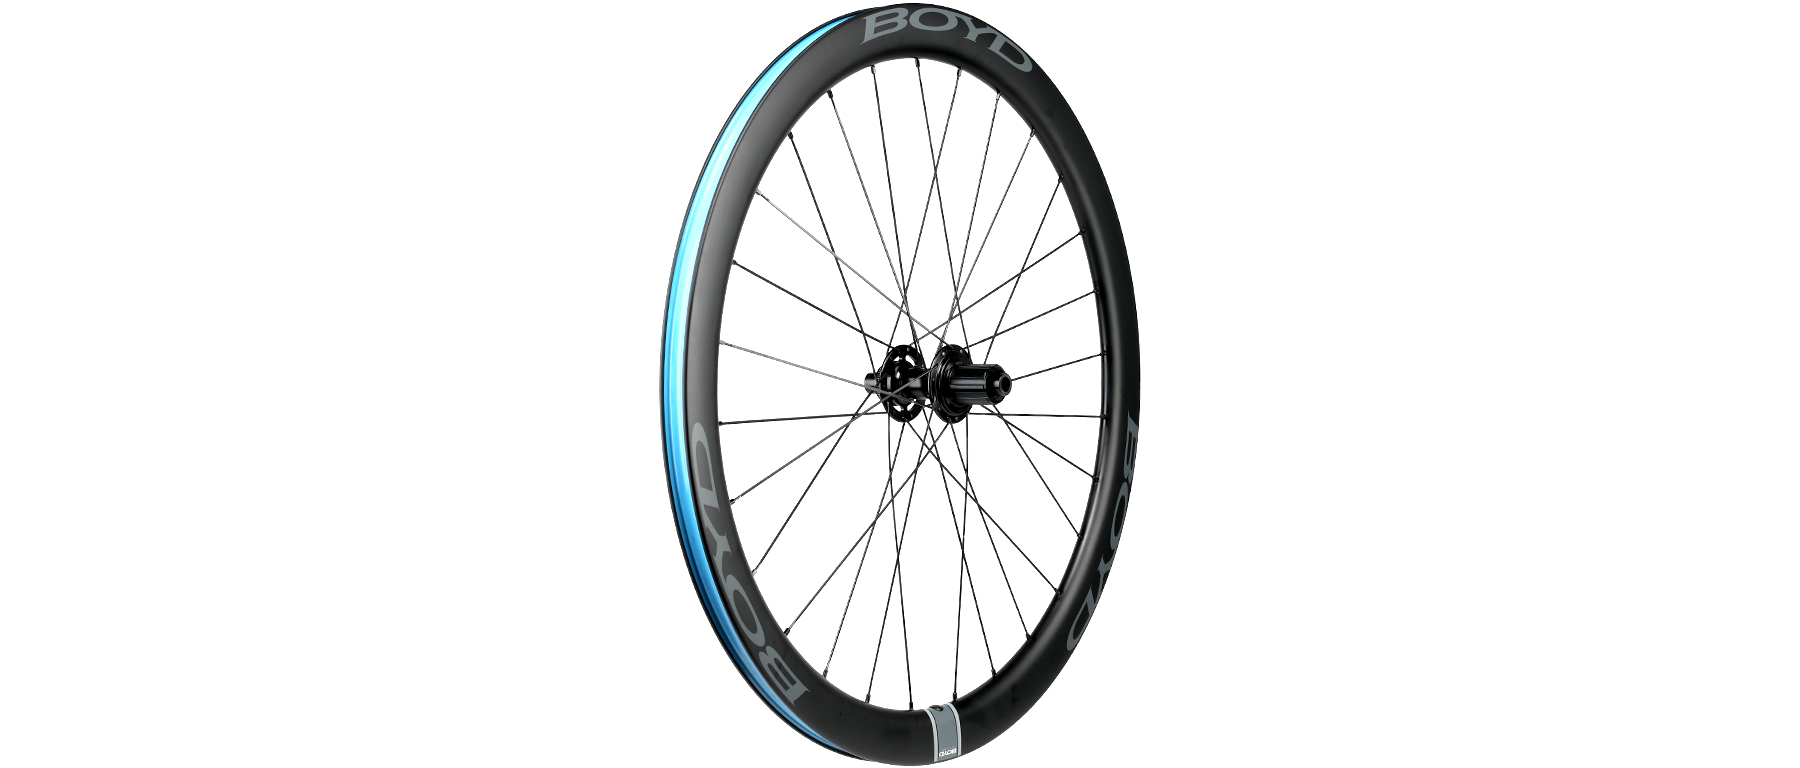 Boyd Cycling Prologue 44mm Carbon Disc Wheelset